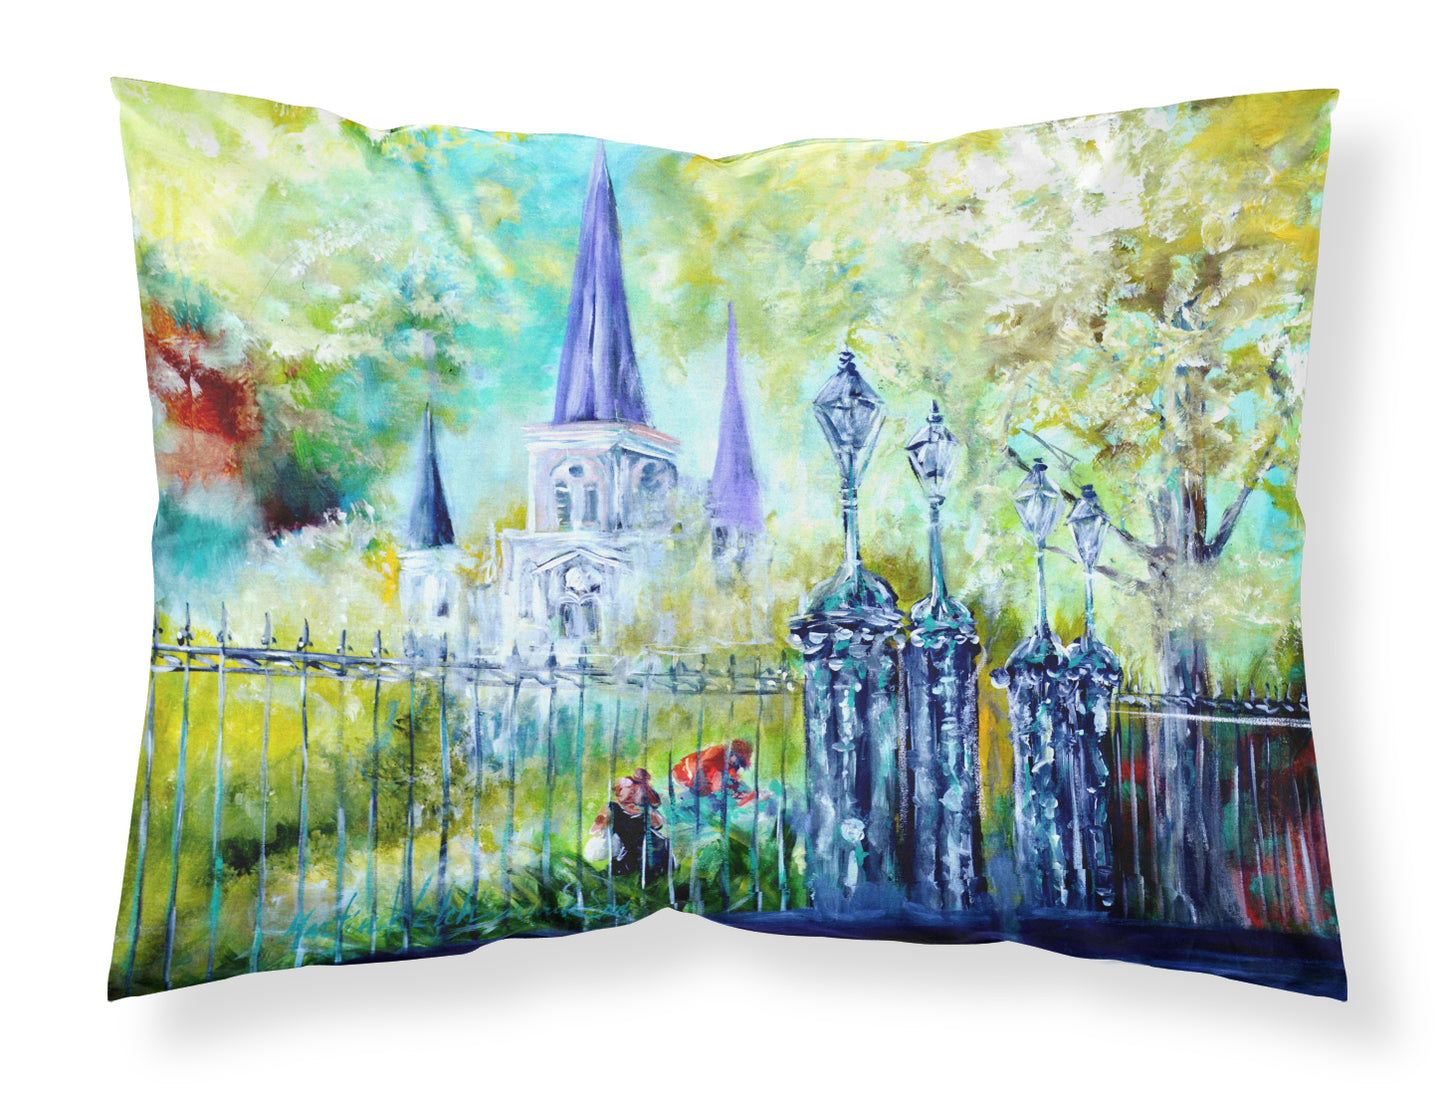 Buy this St Louis Cathedrial Across the Square Fabric Standard Pillowcase